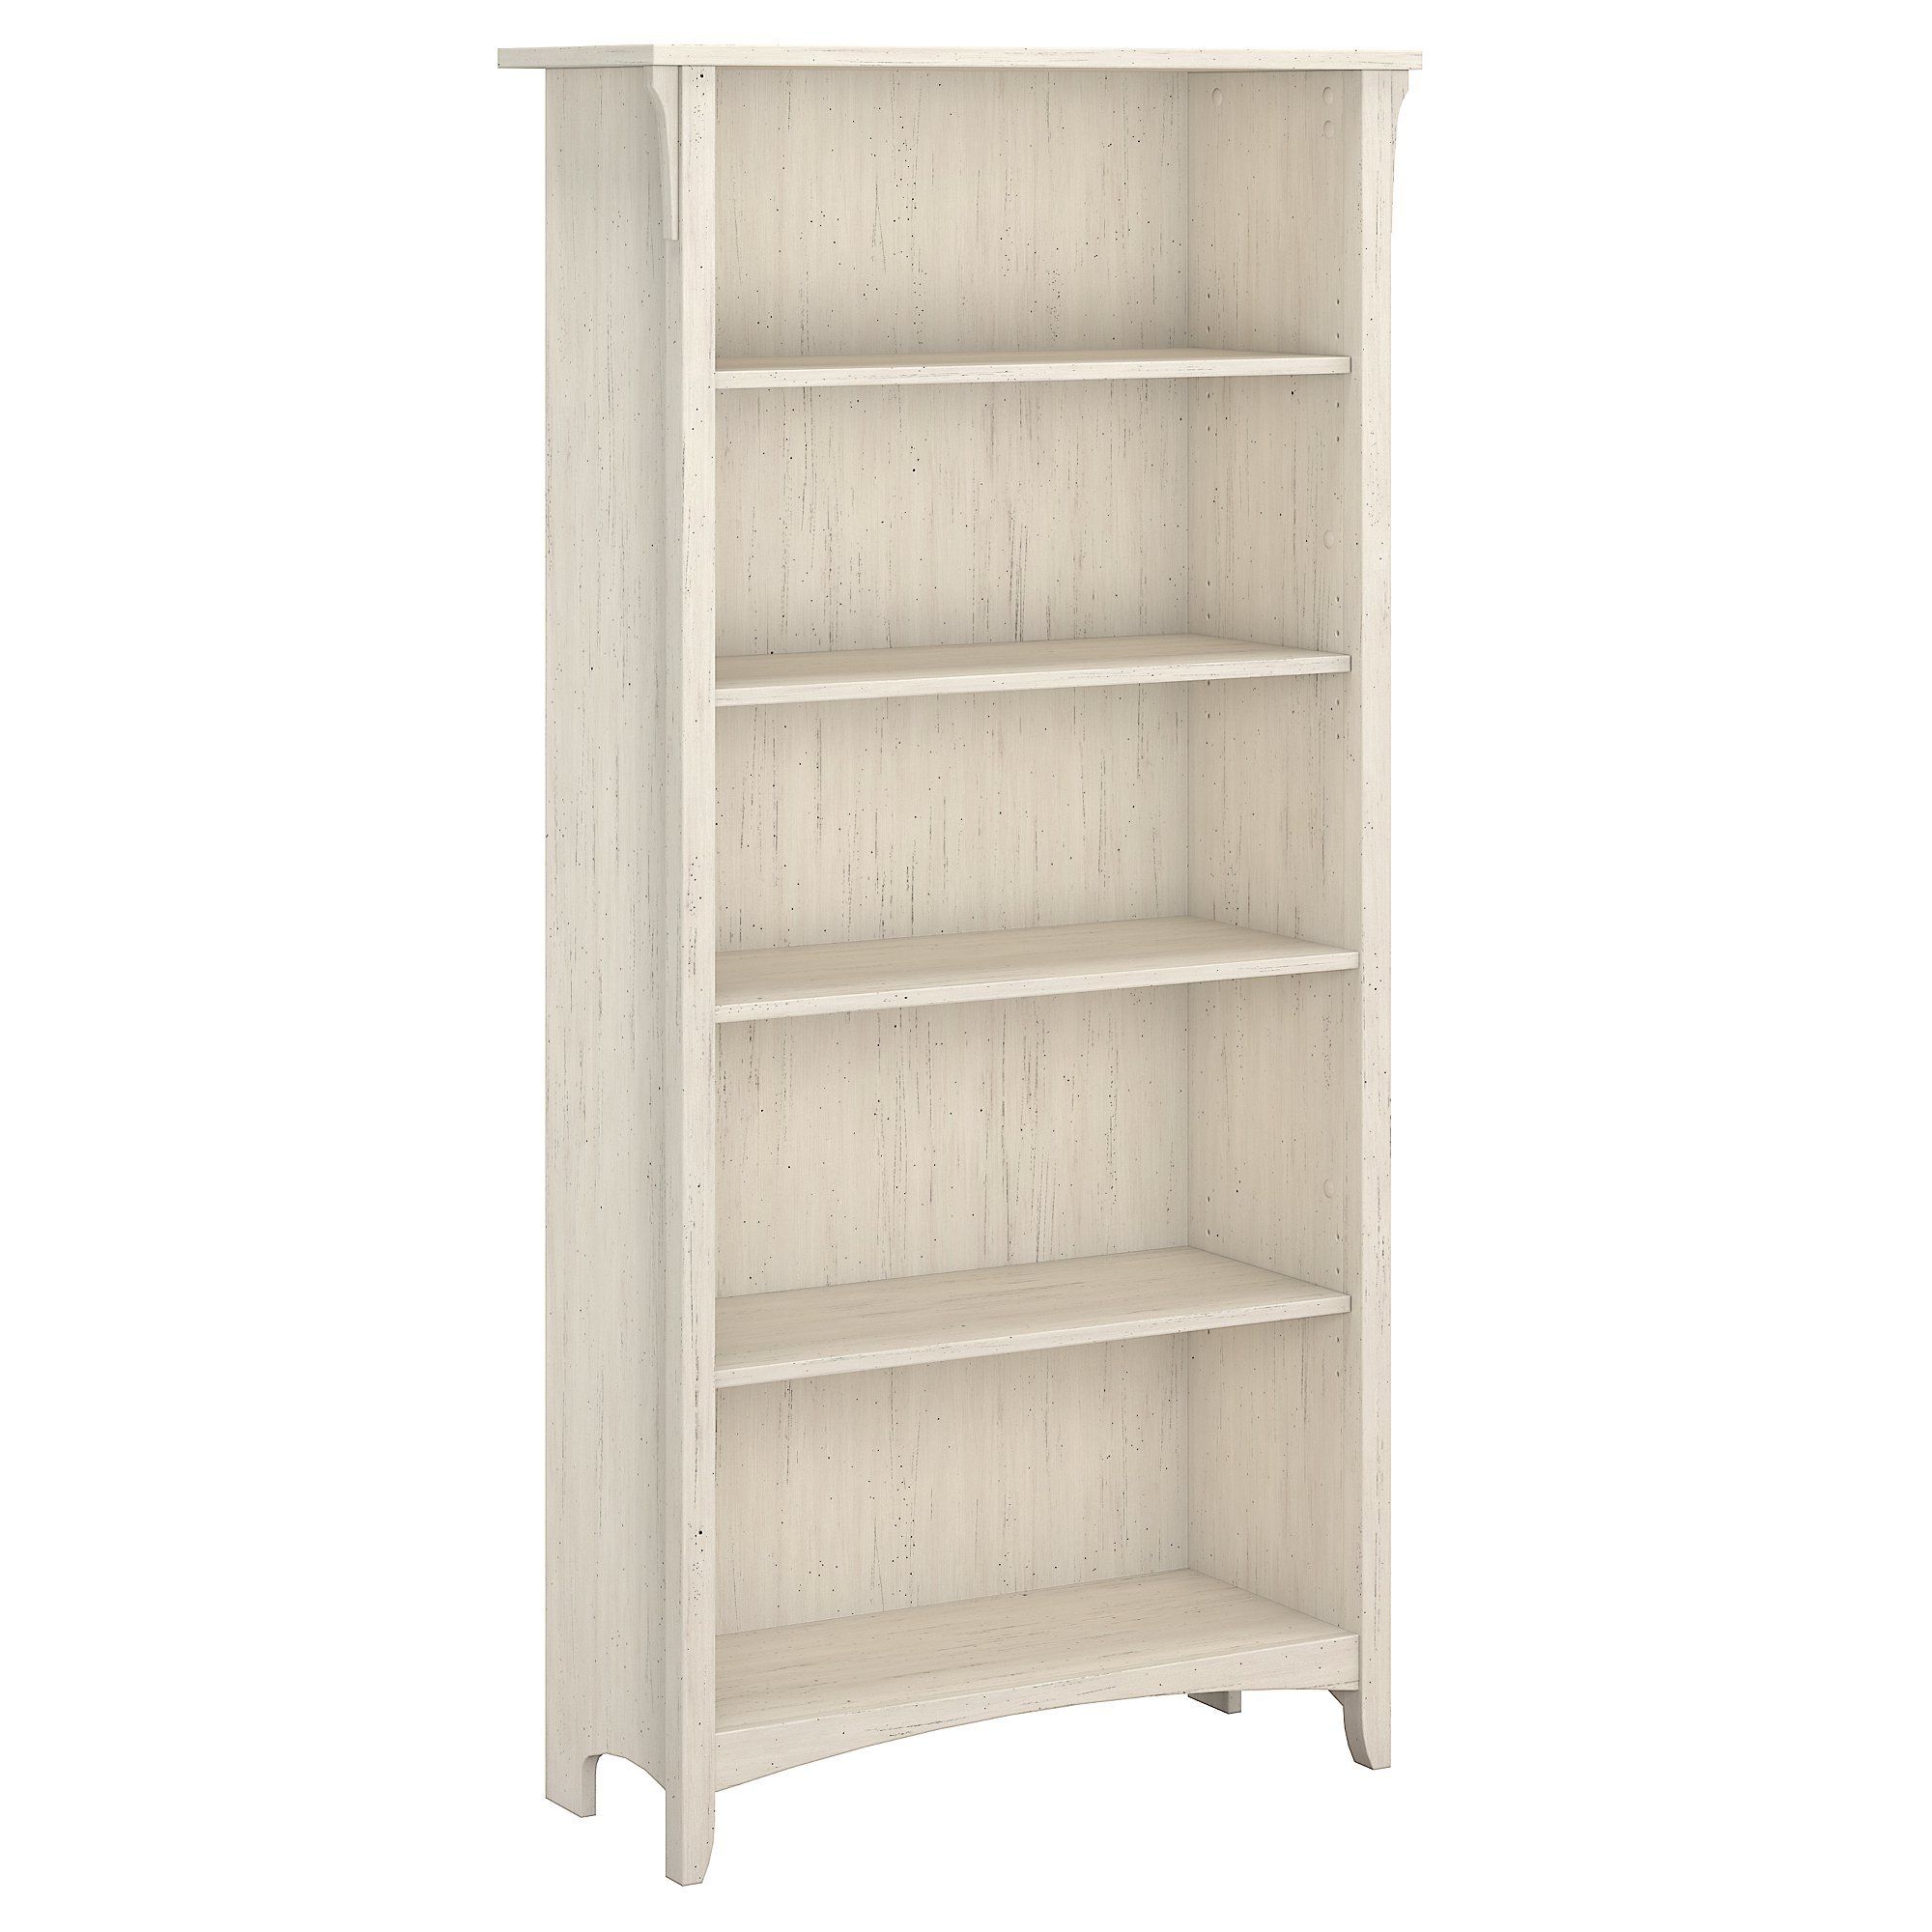 Lark Manor Ottman Standard Bookcase With Widely Used Kiley Standard Bookcases (View 14 of 20)